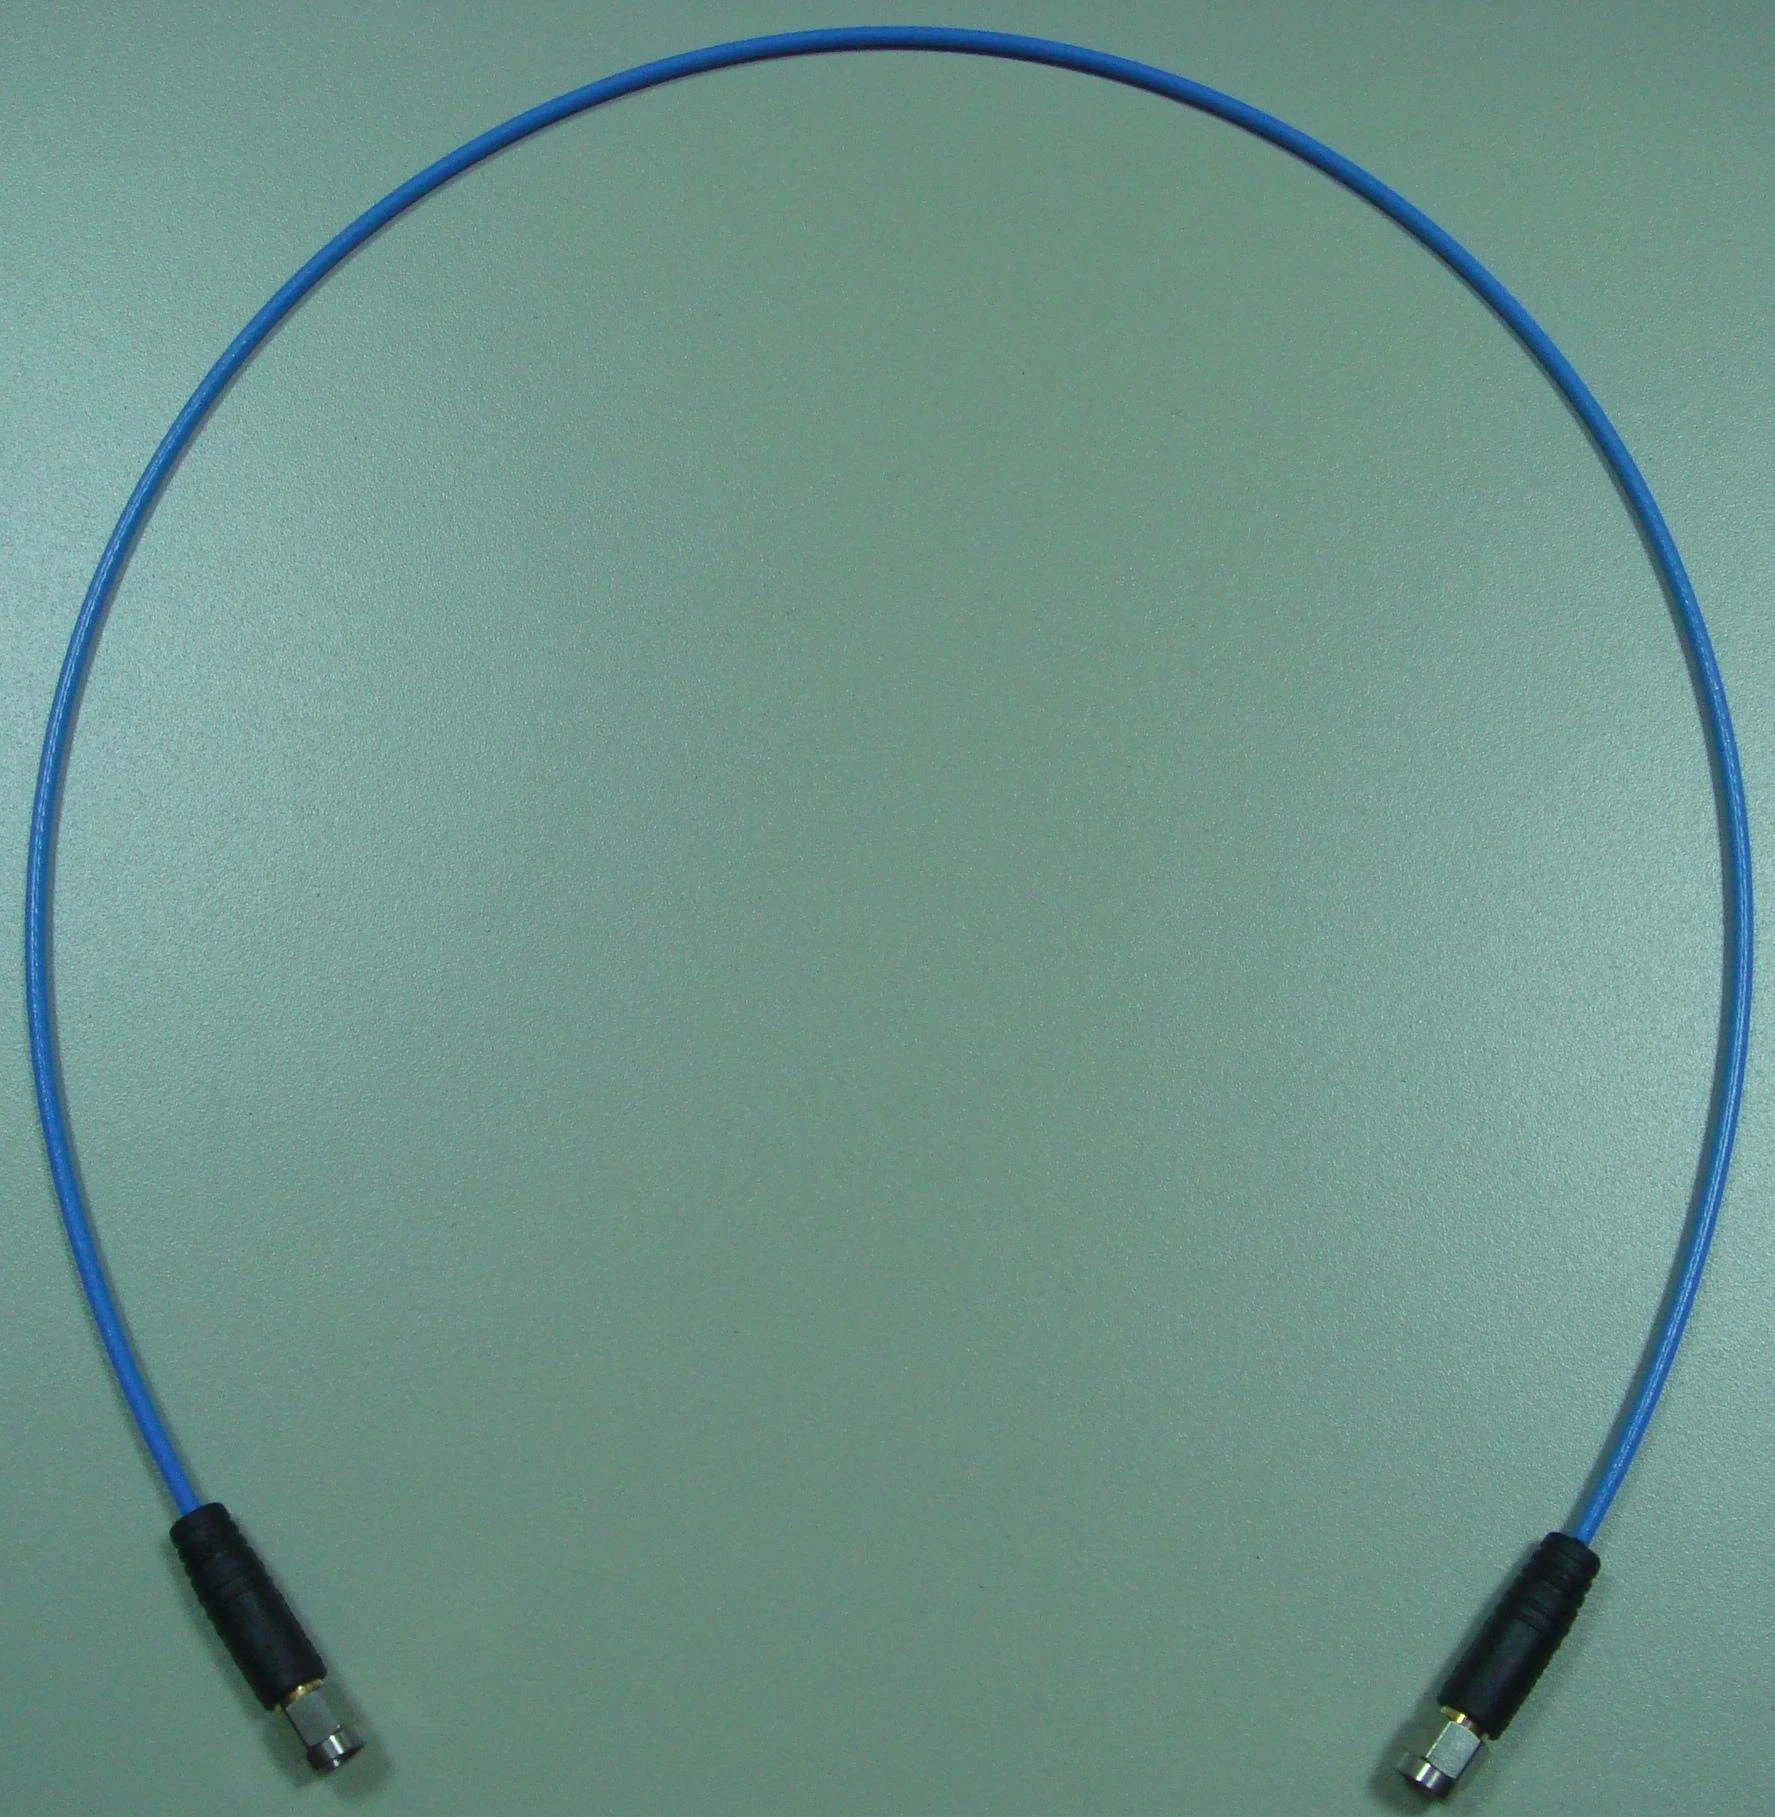 RF Cable